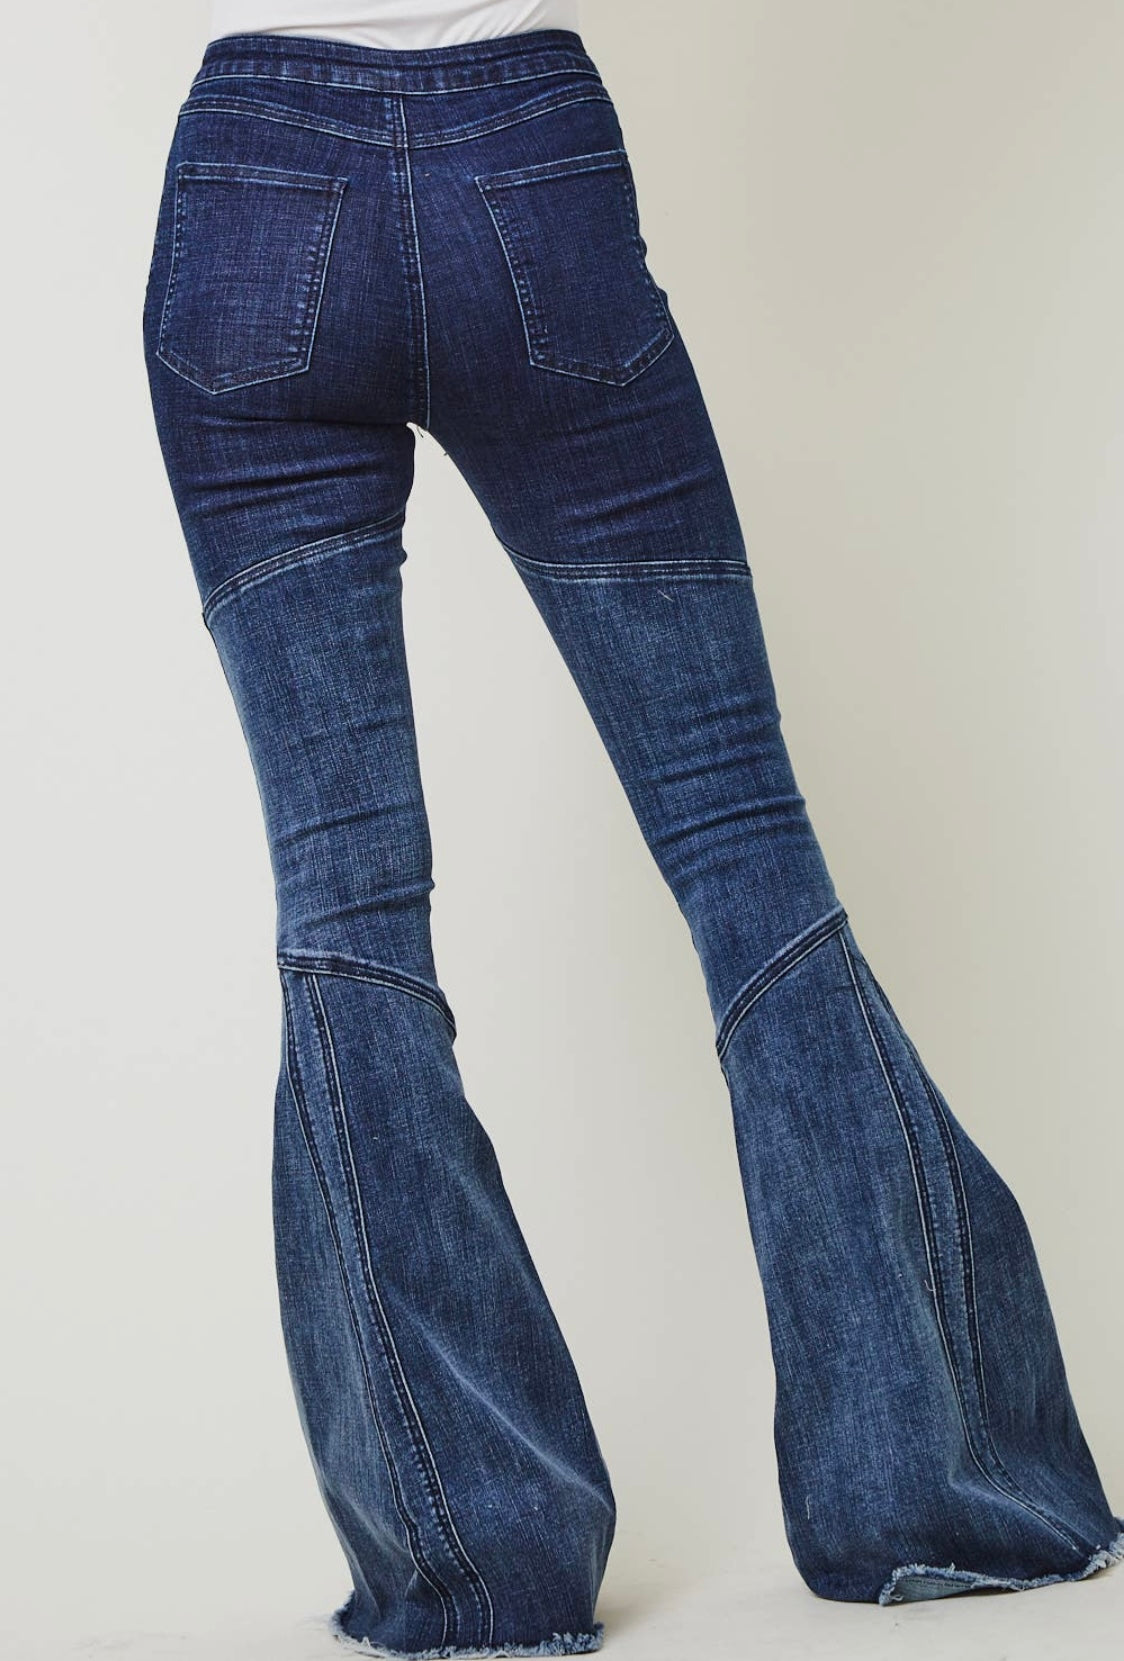 Meet your new favourite jeans